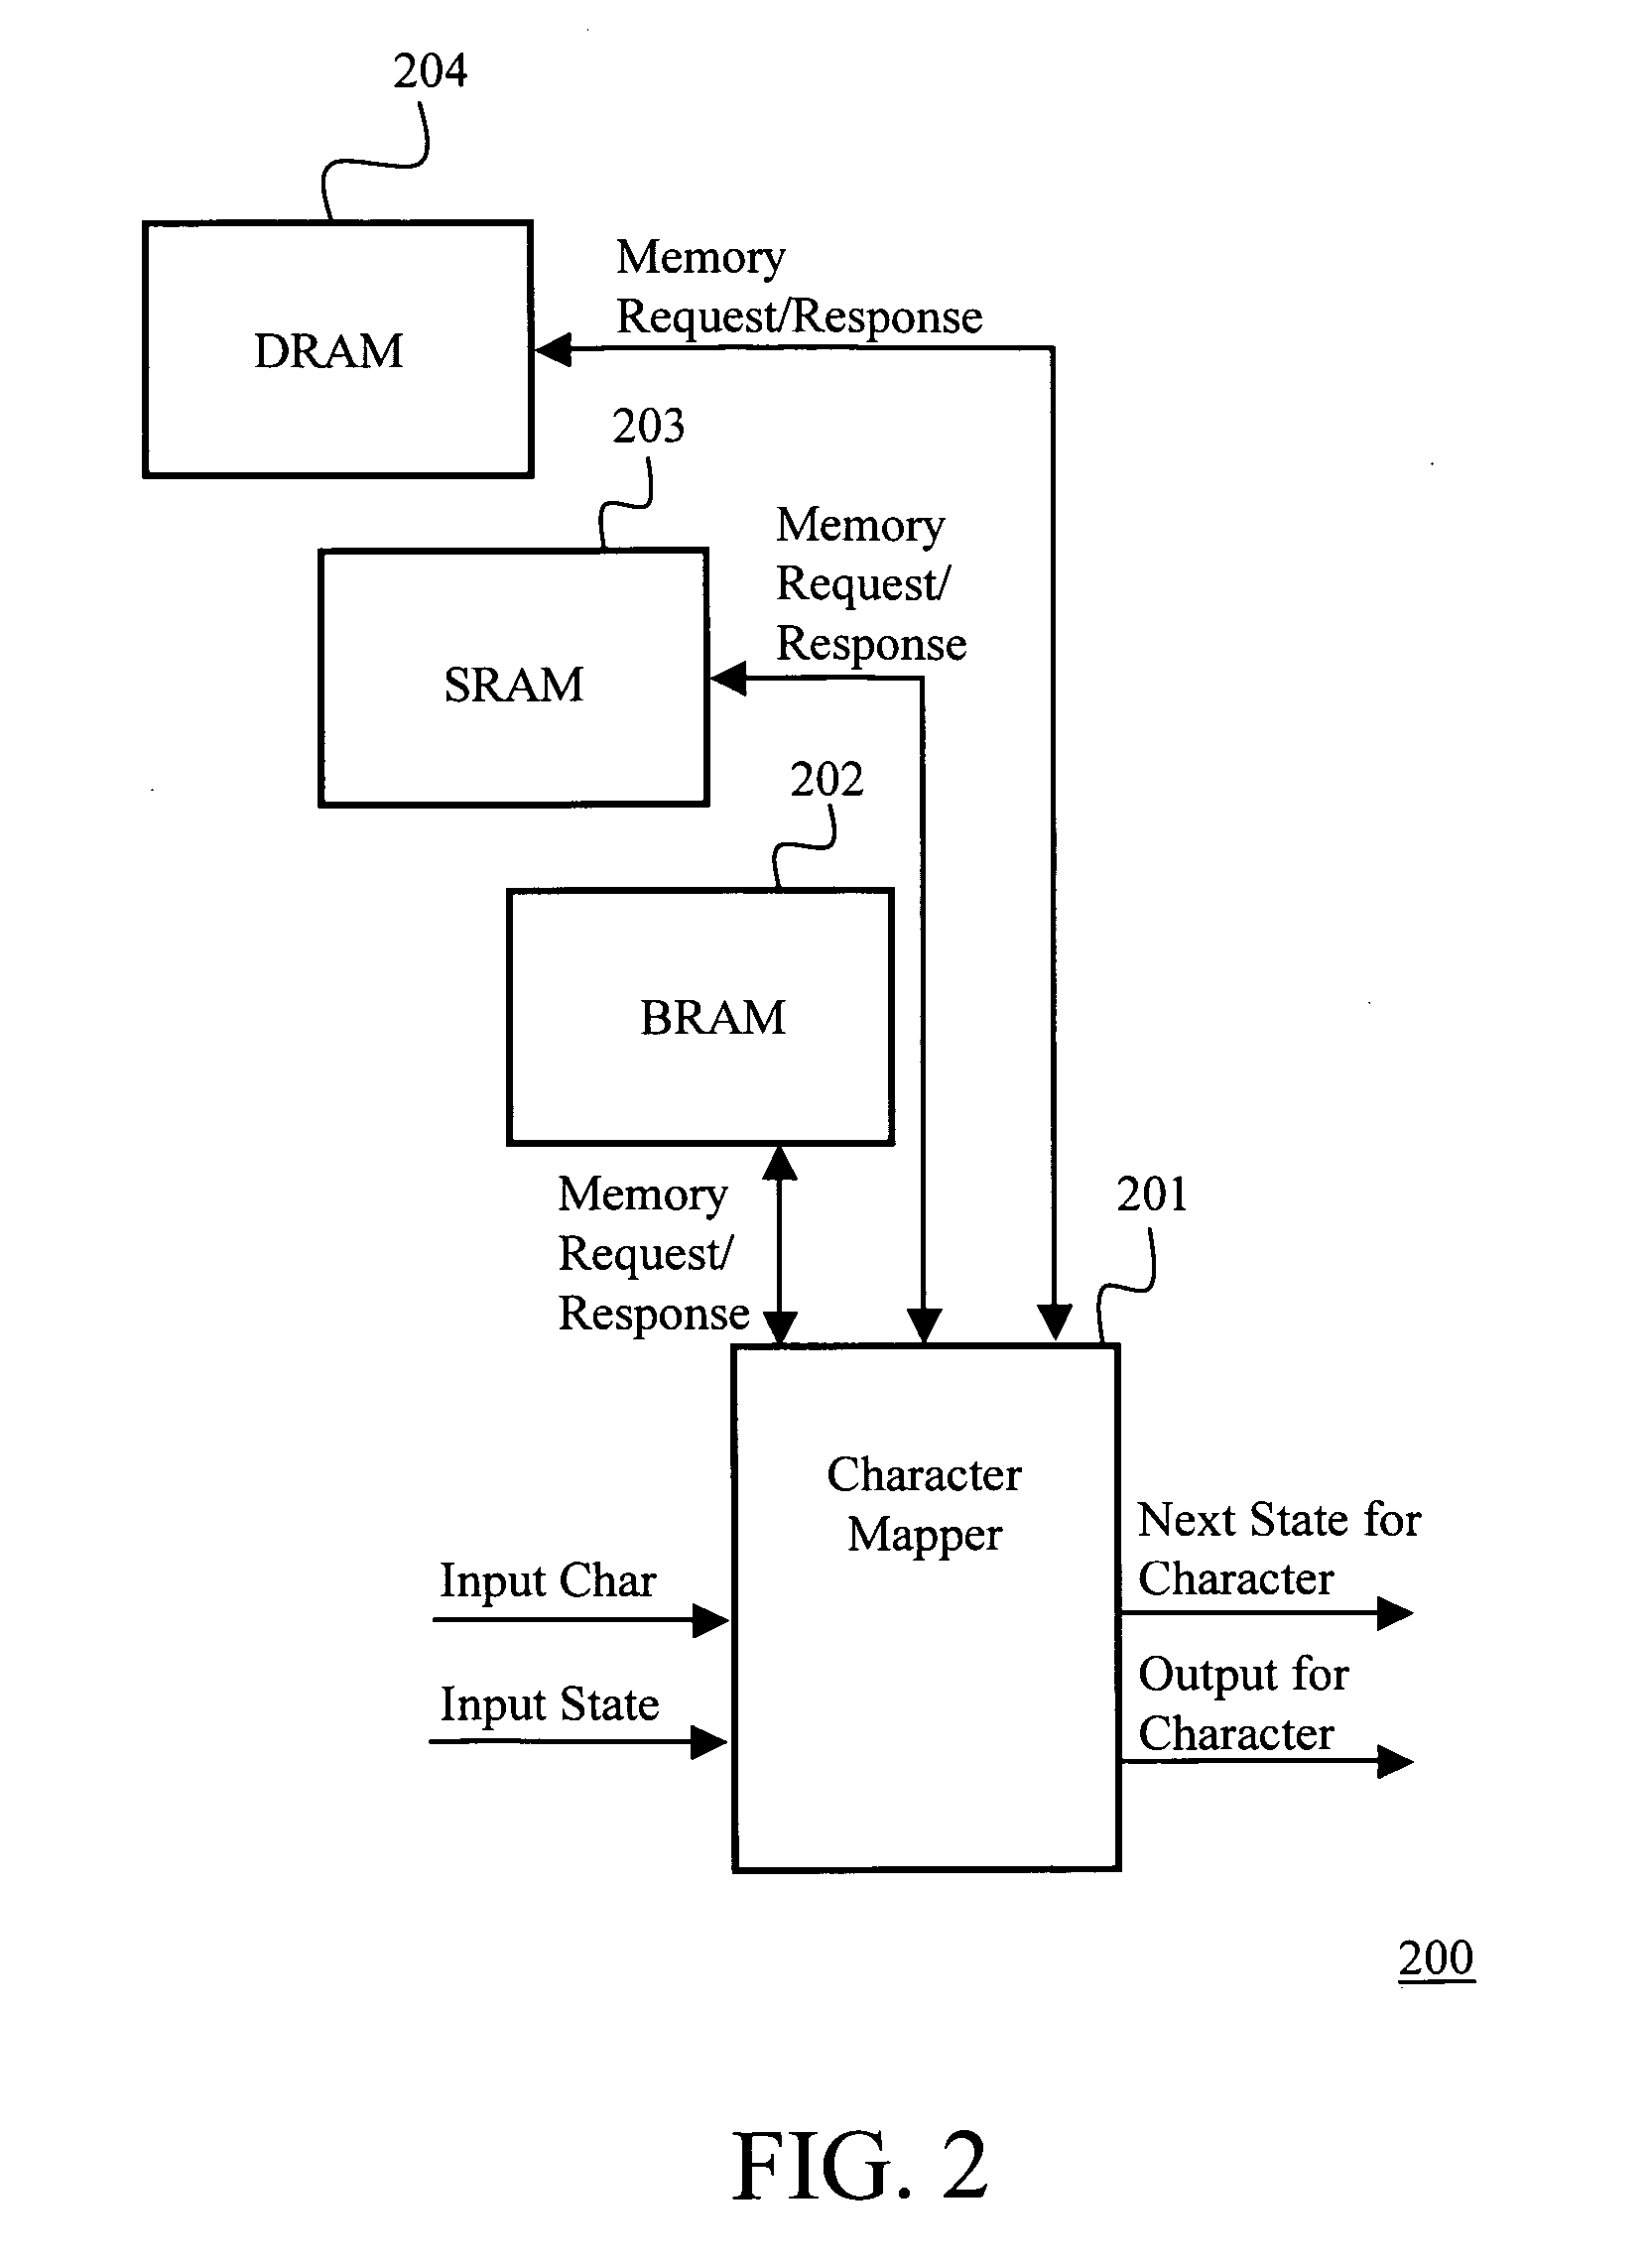 Layered memory architecture for deterministic finite automaton based string matching useful in network intrusion detection and prevention systems and apparatuses